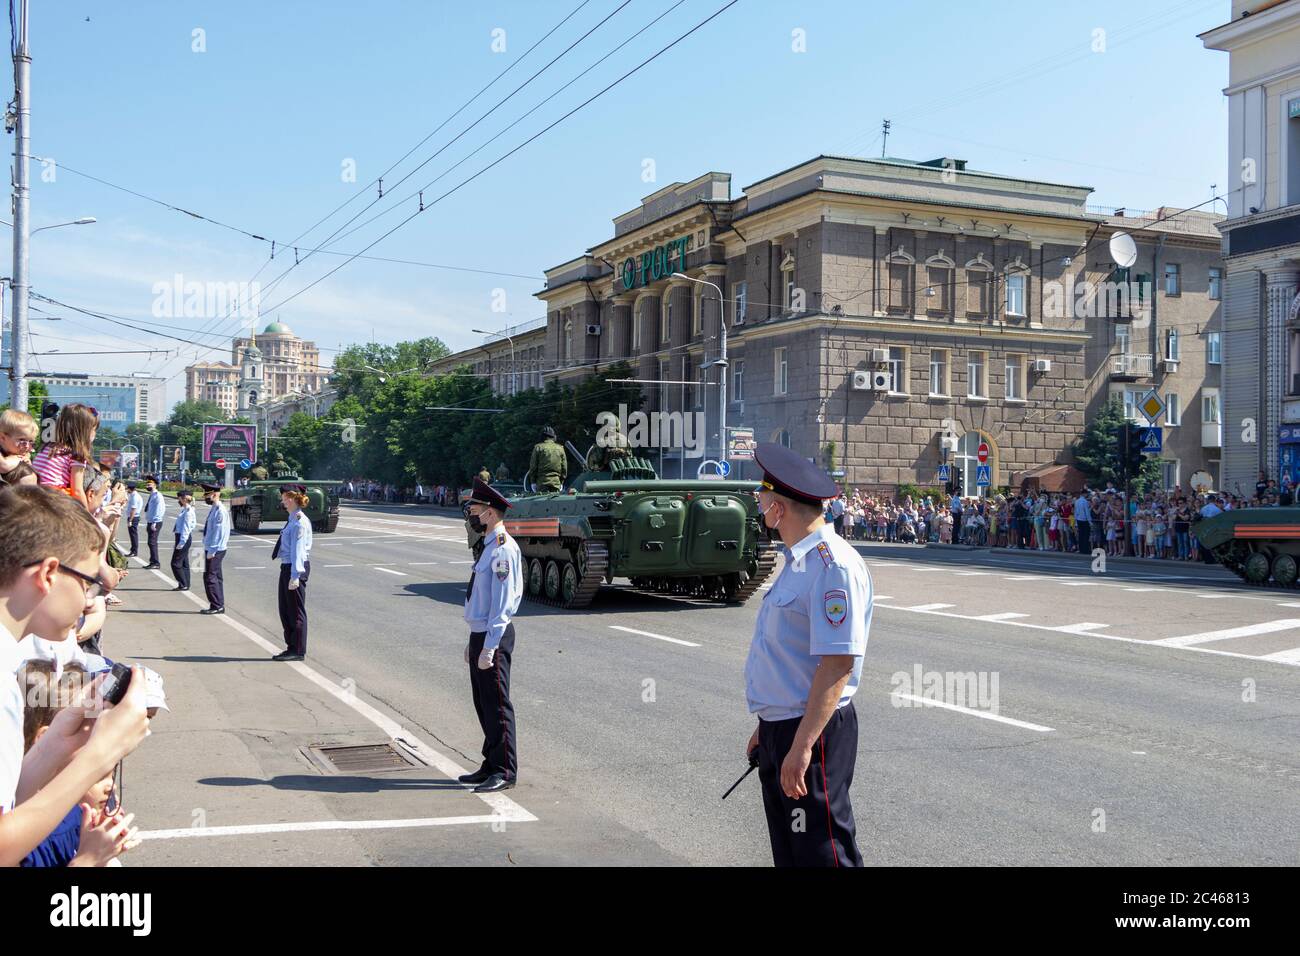 Donetsk, Donetsk People Republic, Ukraine - June 24, 2020: Landing vehicles with soldiers move along the main street of the city during the Victory Pa Stock Photo